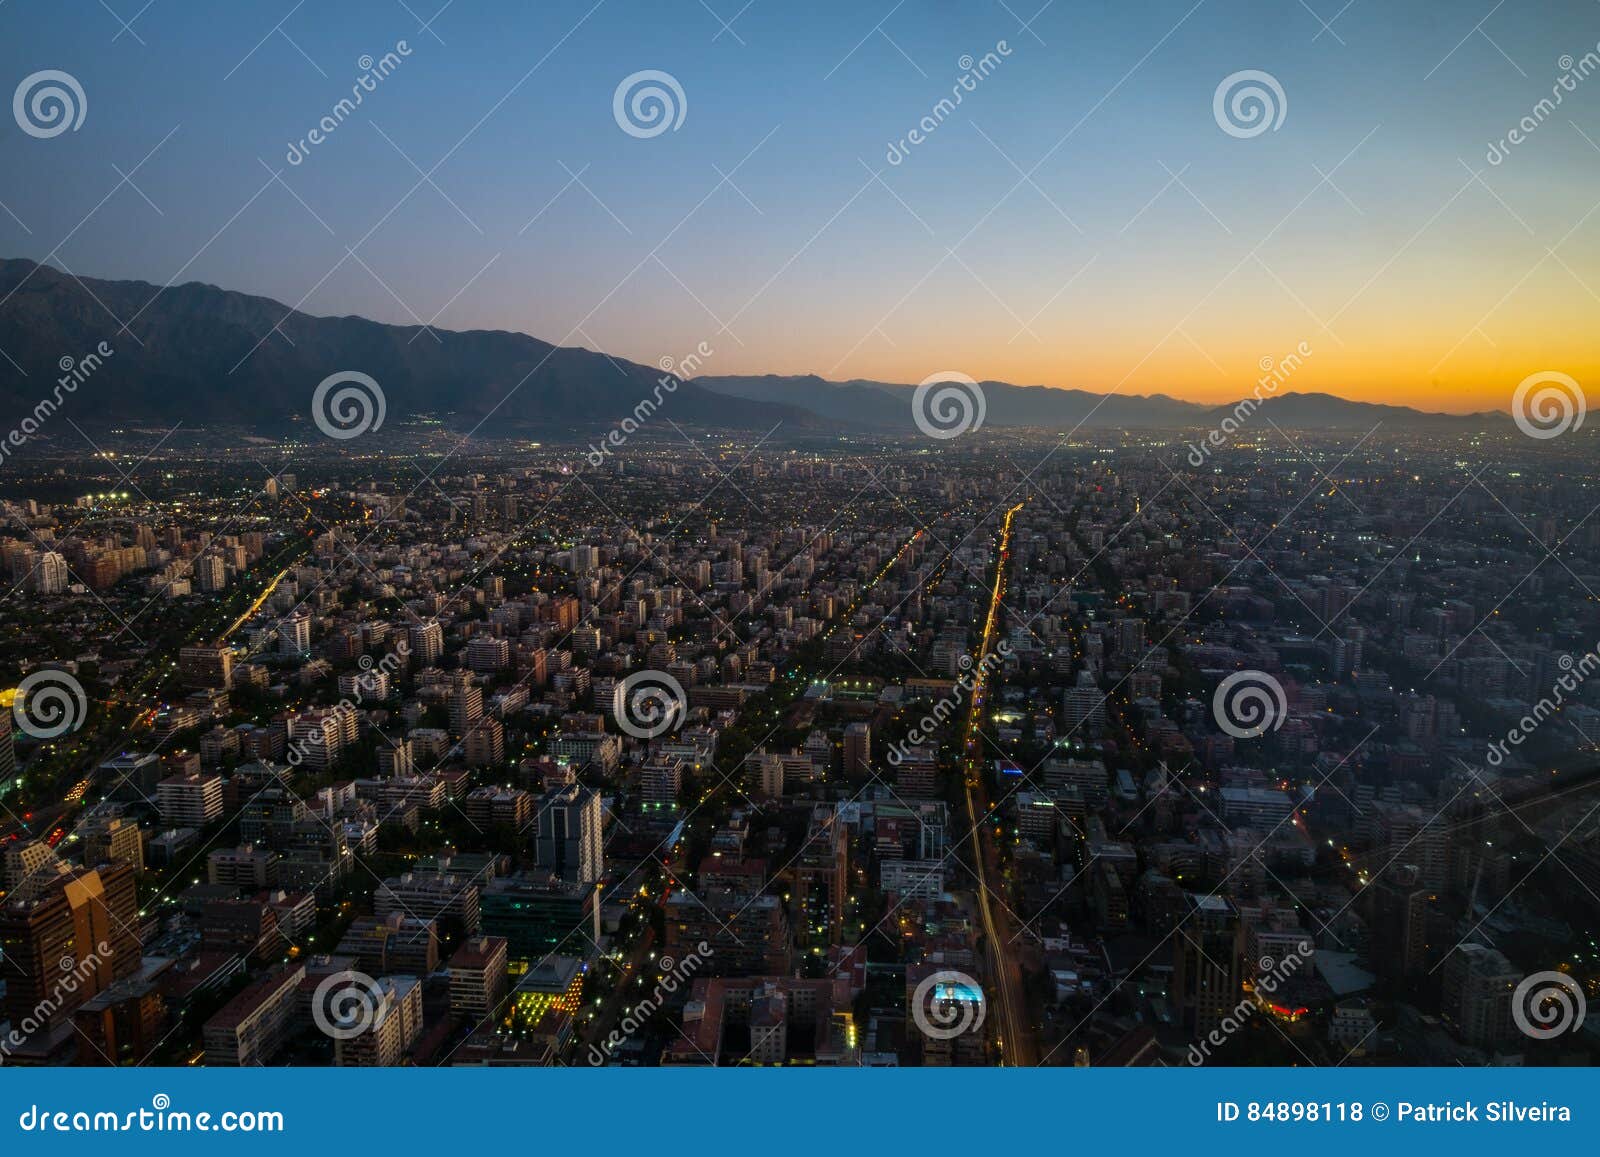 santiago aerial view from the costanera center at sunset, santiago chile